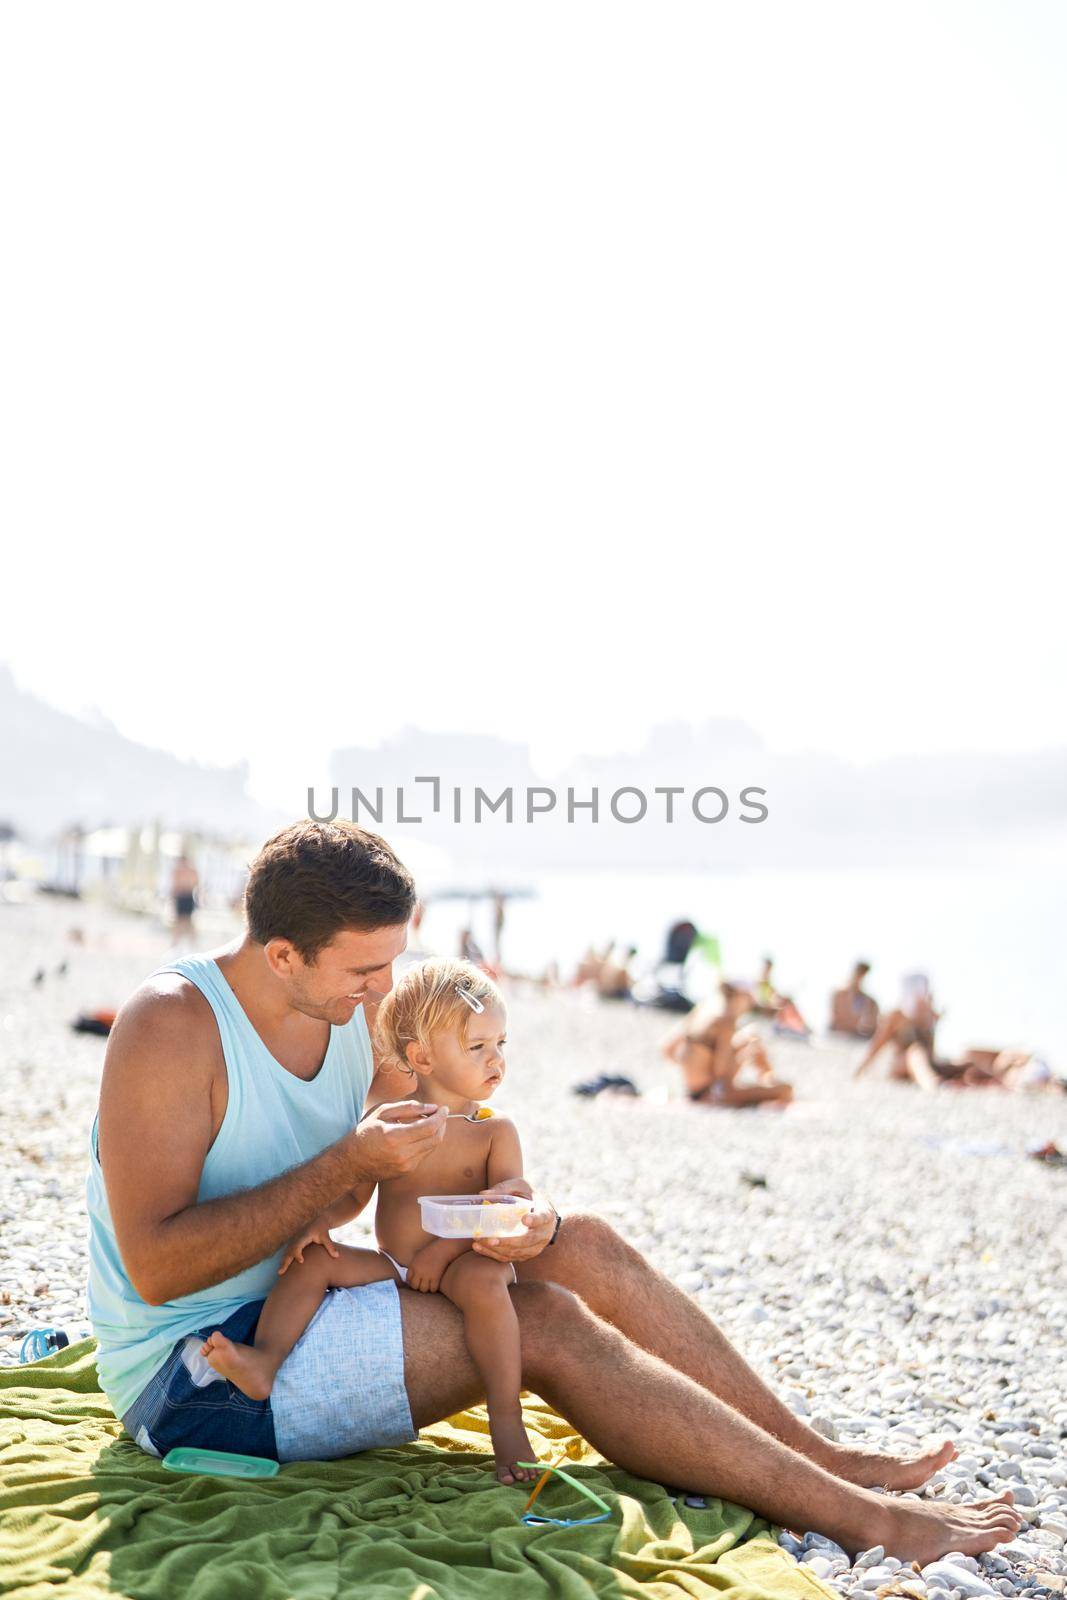 Smiling dad feeding little girl from spoon. High quality photo